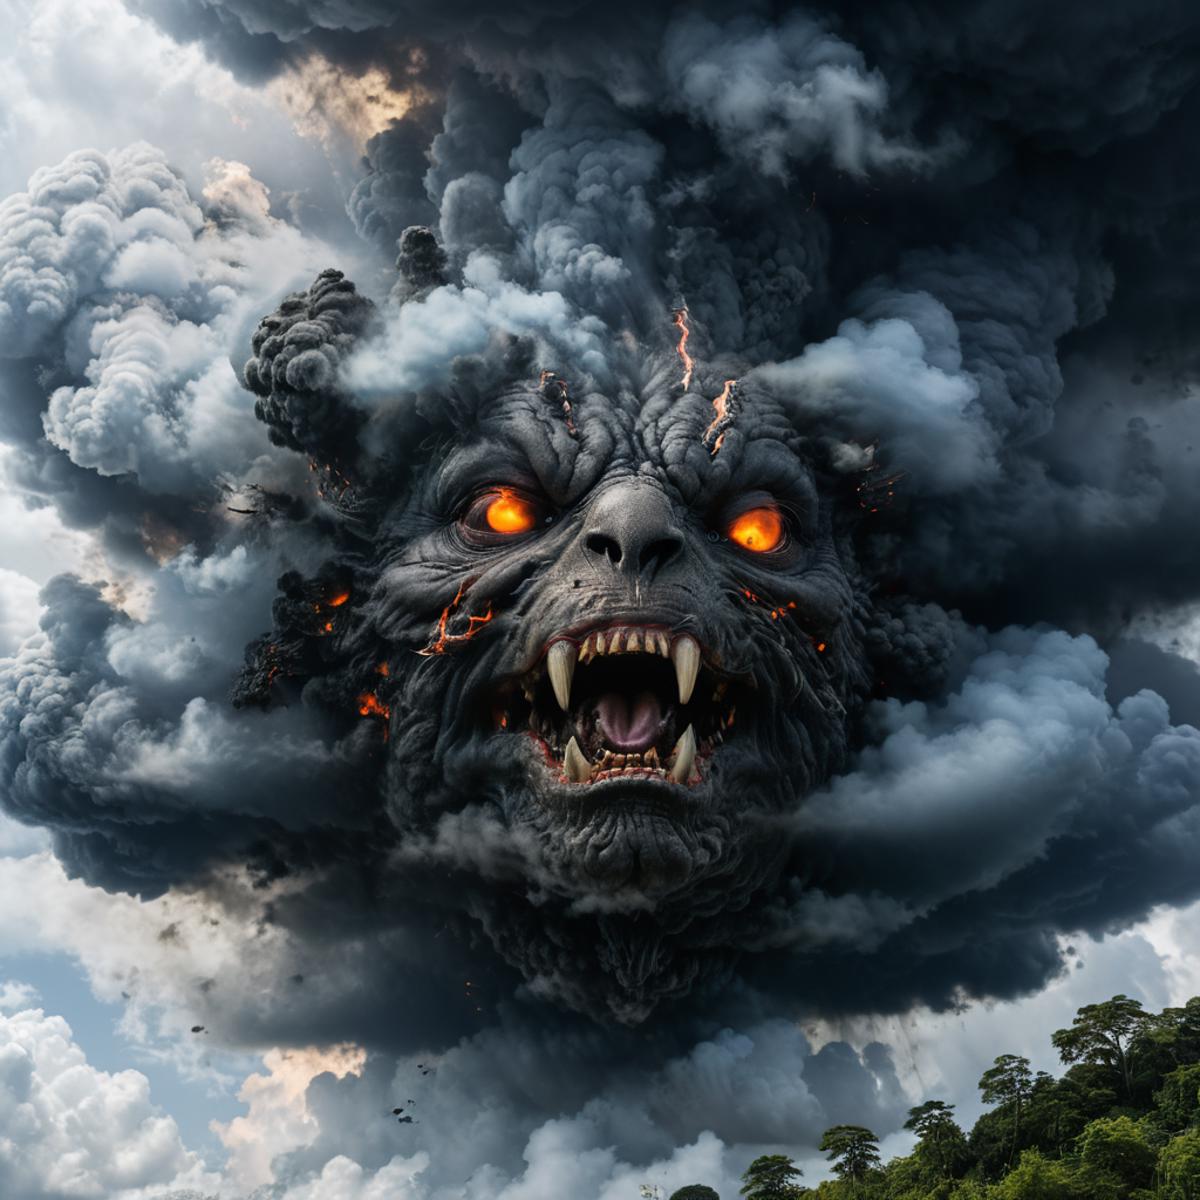 A monster with red eyes and sharp teeth is roaring in the sky, surrounded by a cloudy and stormy atmosphere.